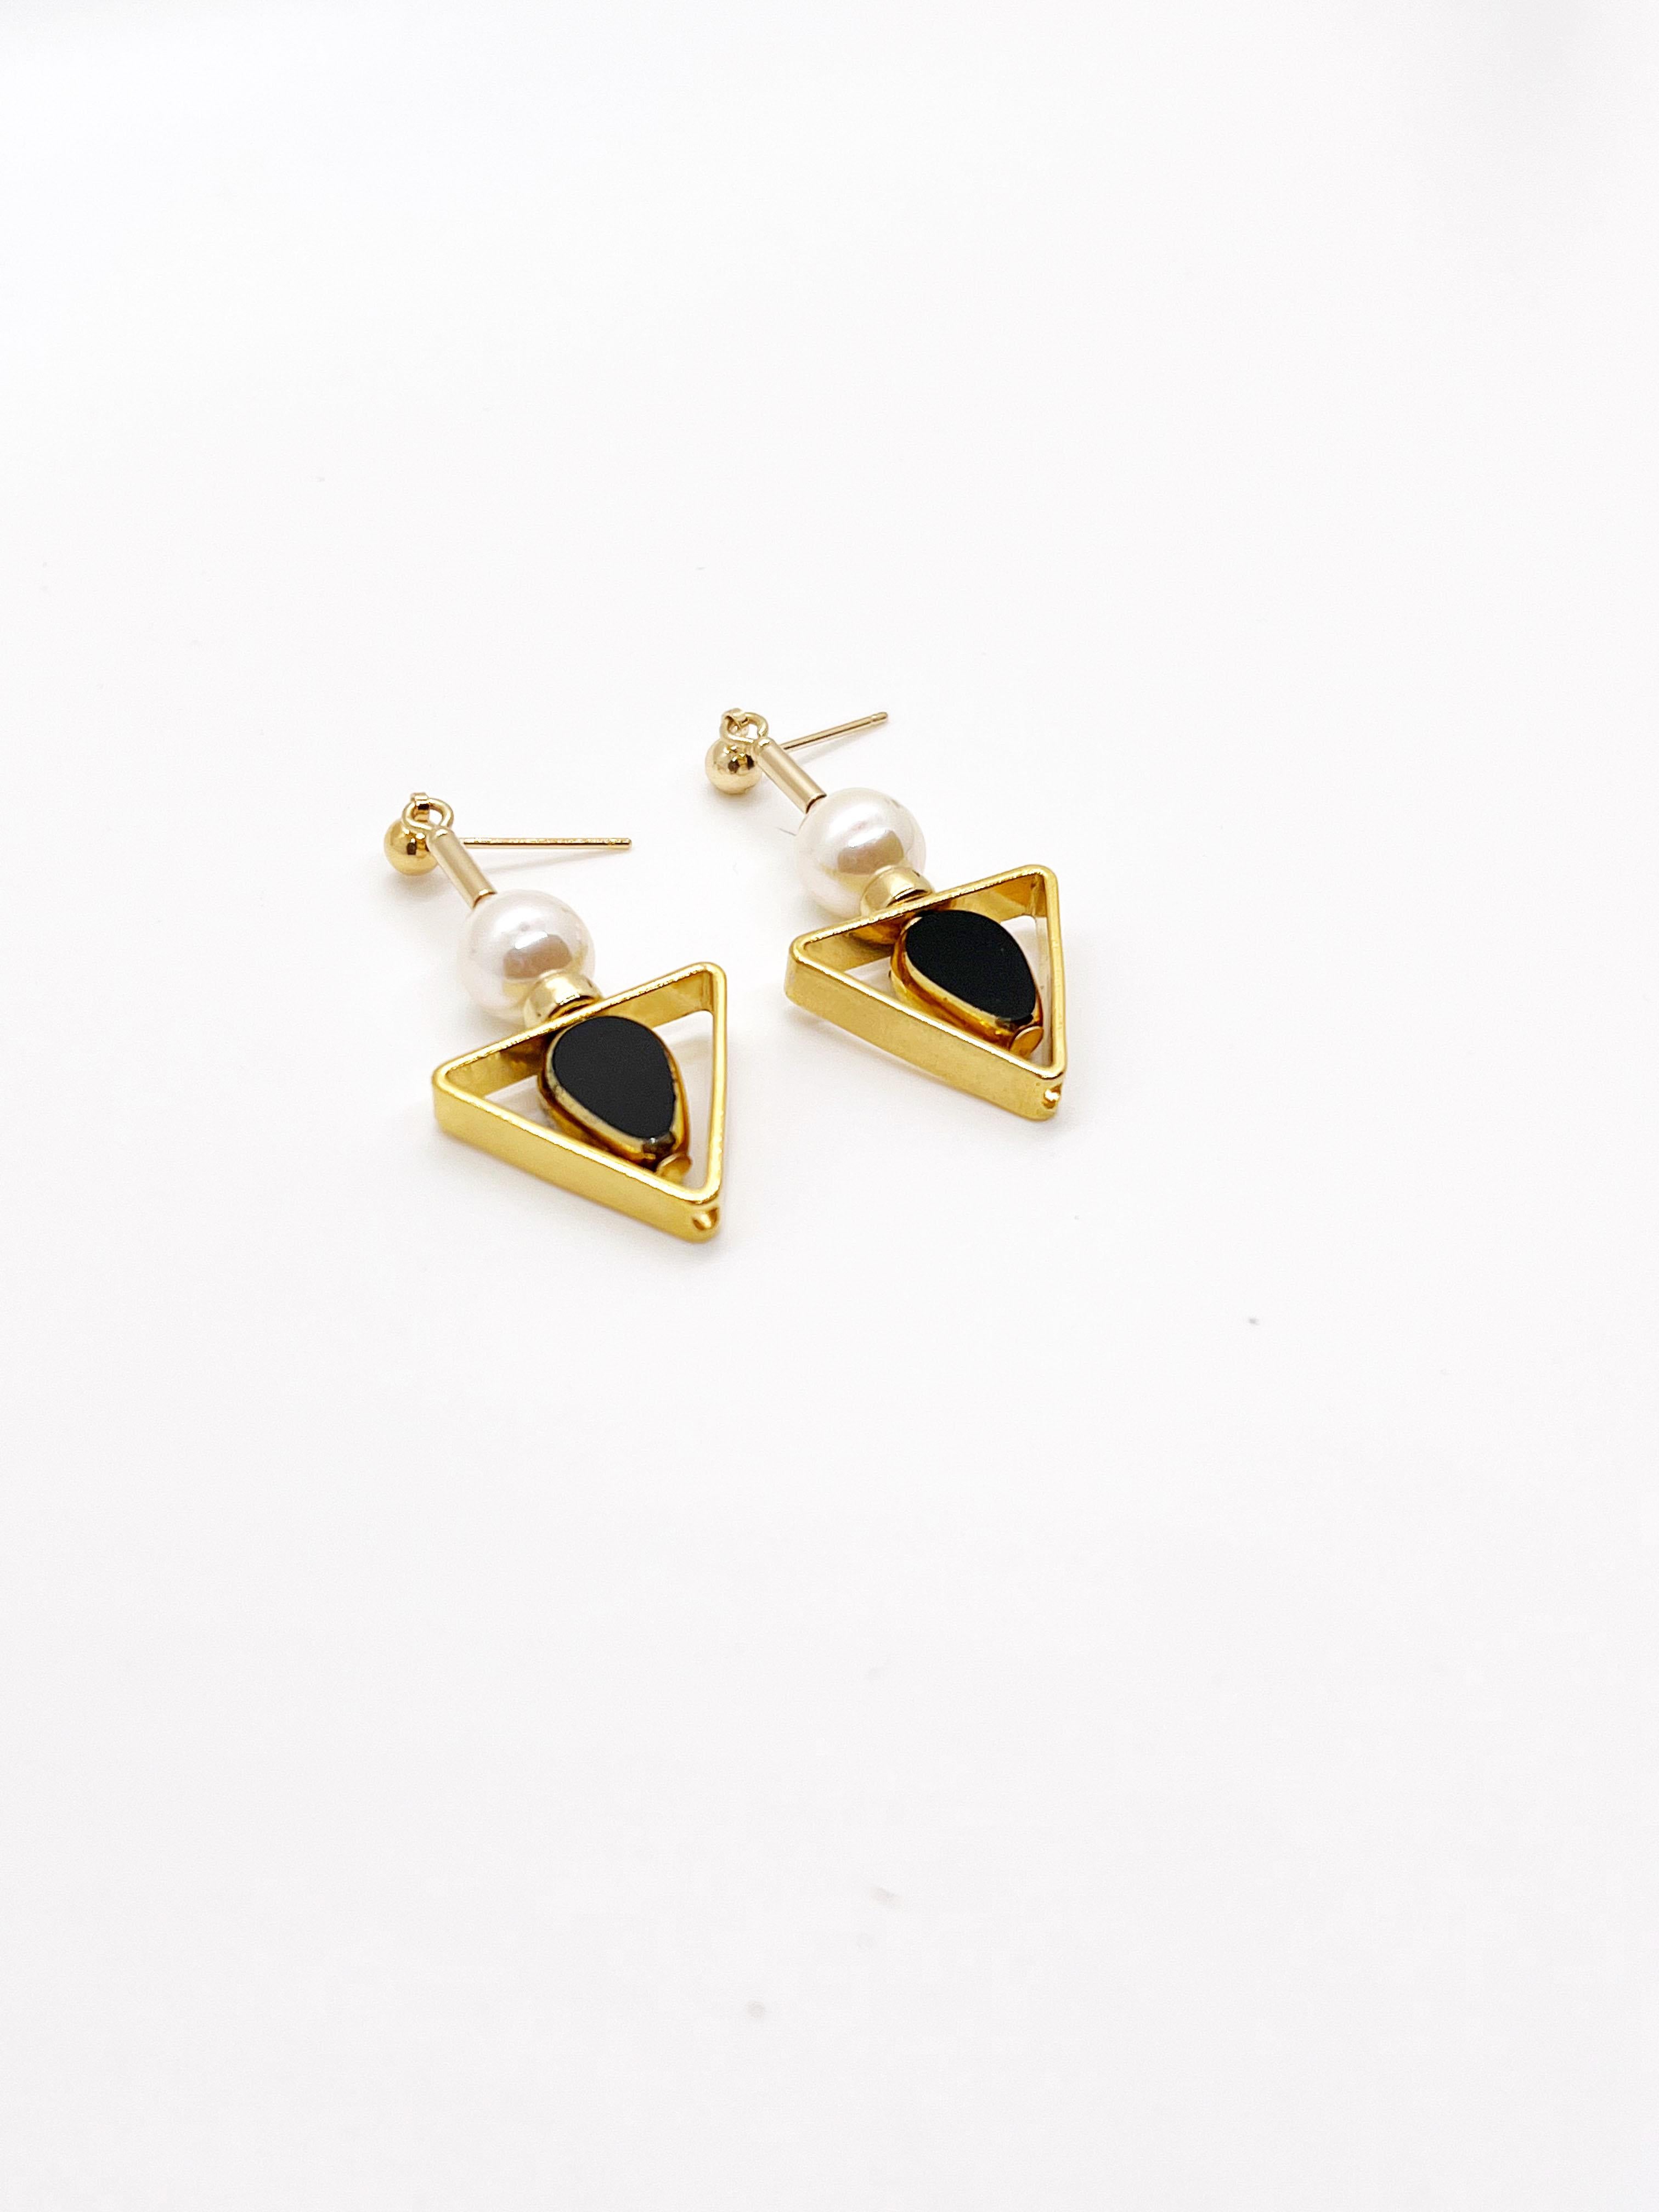 Black teardrop vintage German glass beads edged with 24K gold are complimented with freshwater pearls. The earrings are finished with gold filled earring post and  gold filled beads.

The vintage German glass beads that are edged with 24K gold were